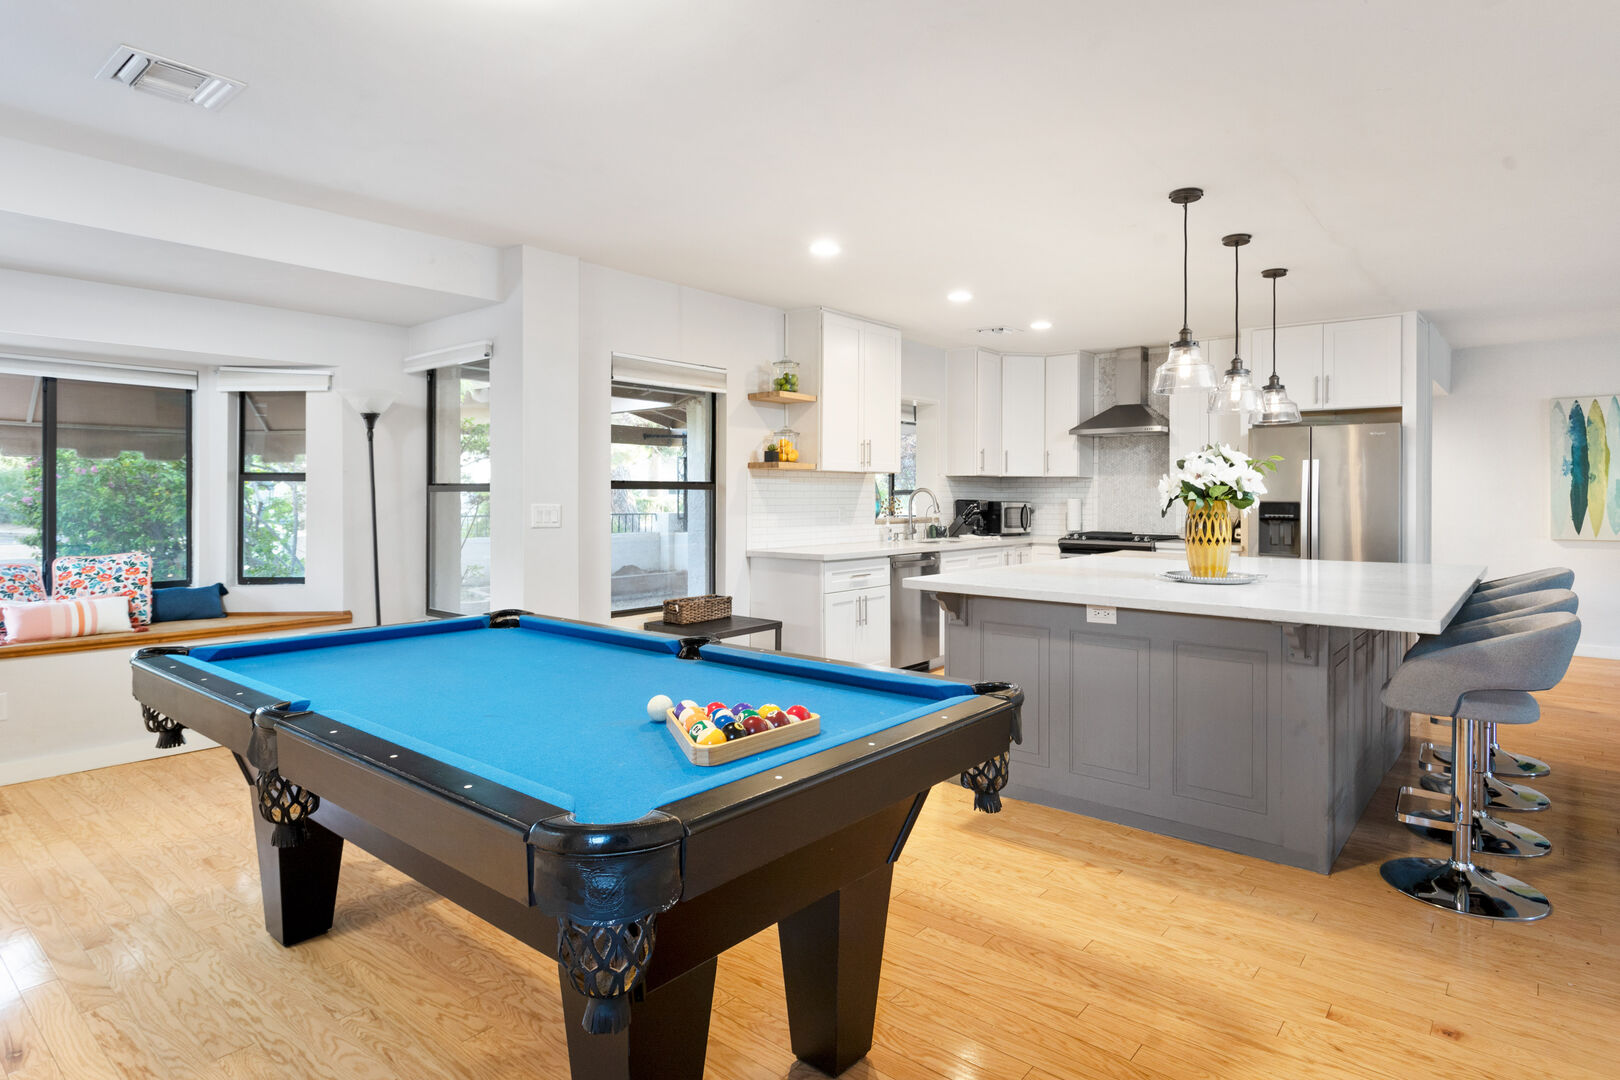 Pool Table Near Large Kitchen